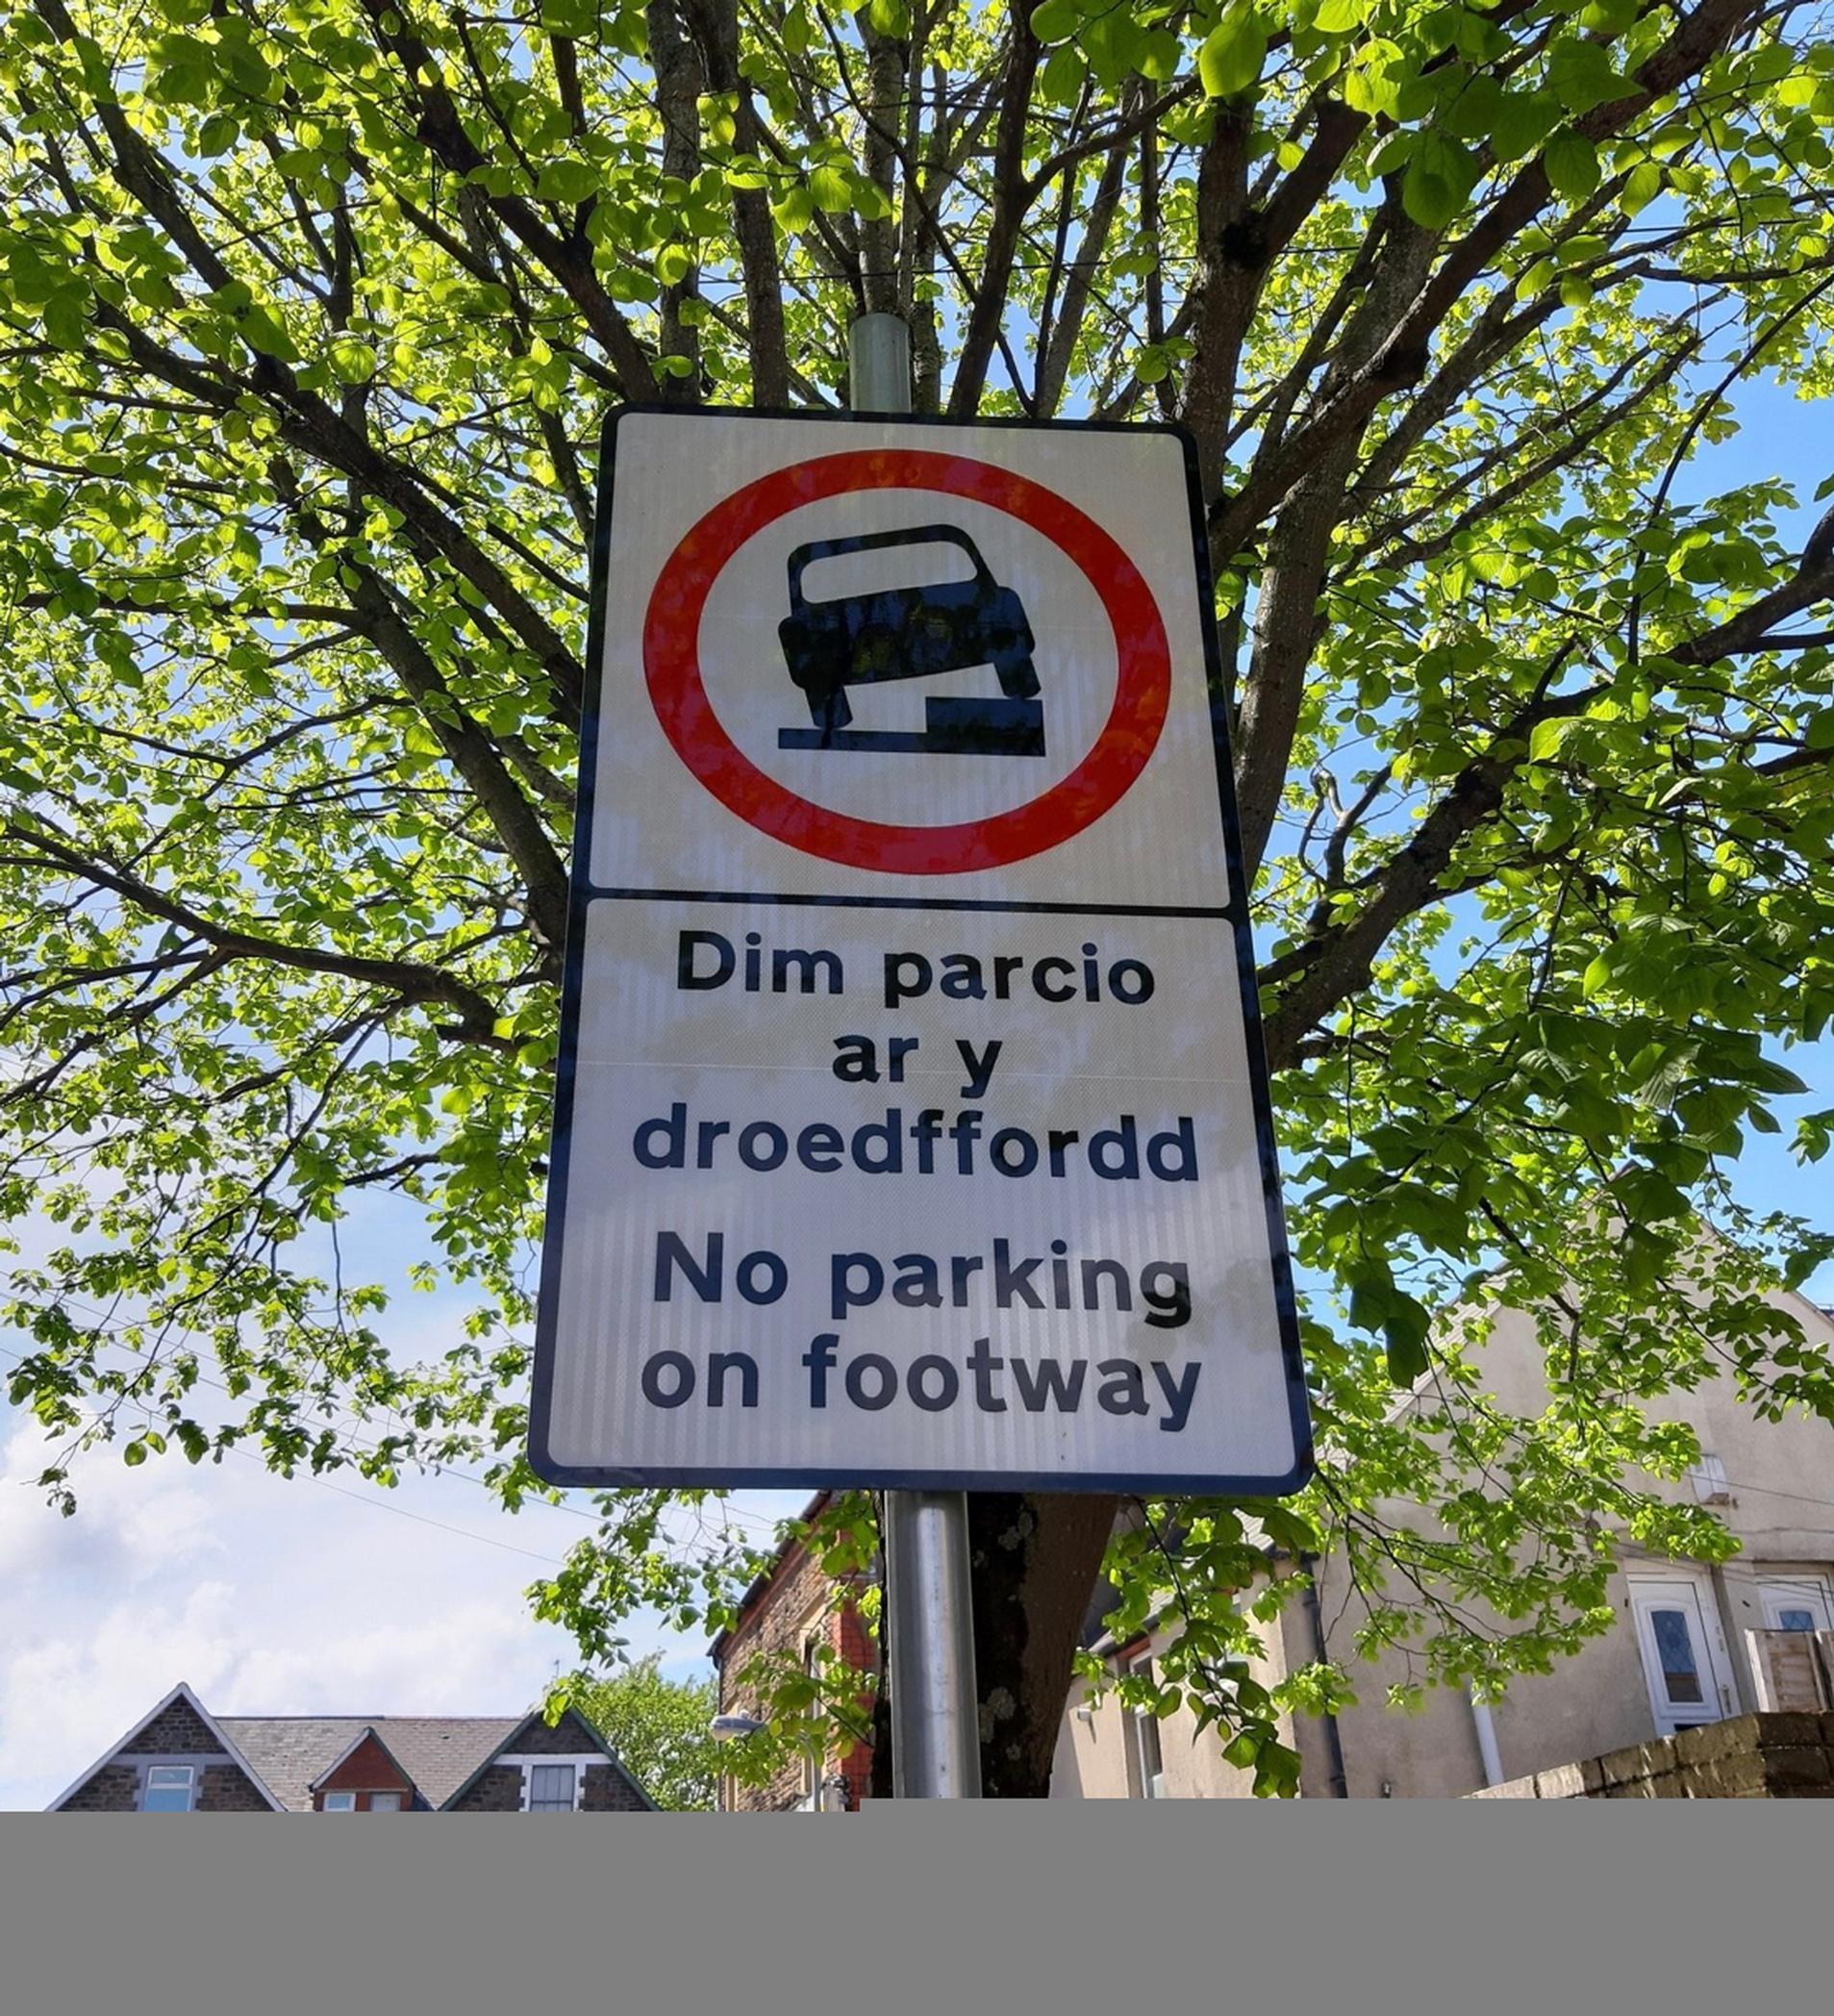 Cardiff began issuing pavement parking fines on 18 May